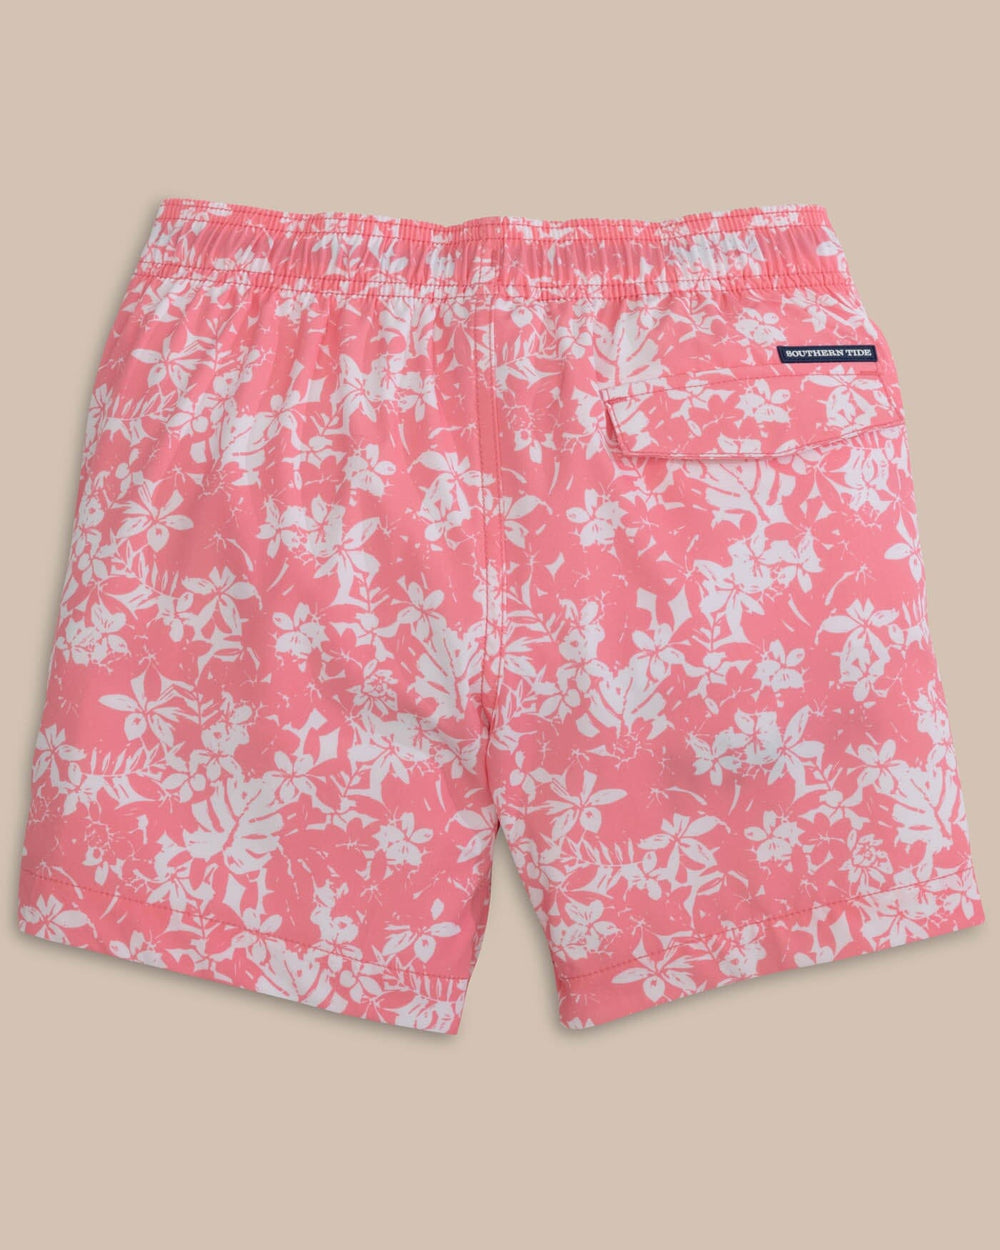 The back view of the Southern Tide Kids Island Blooms Swim Trunk by Southern Tide - Geranium Pink